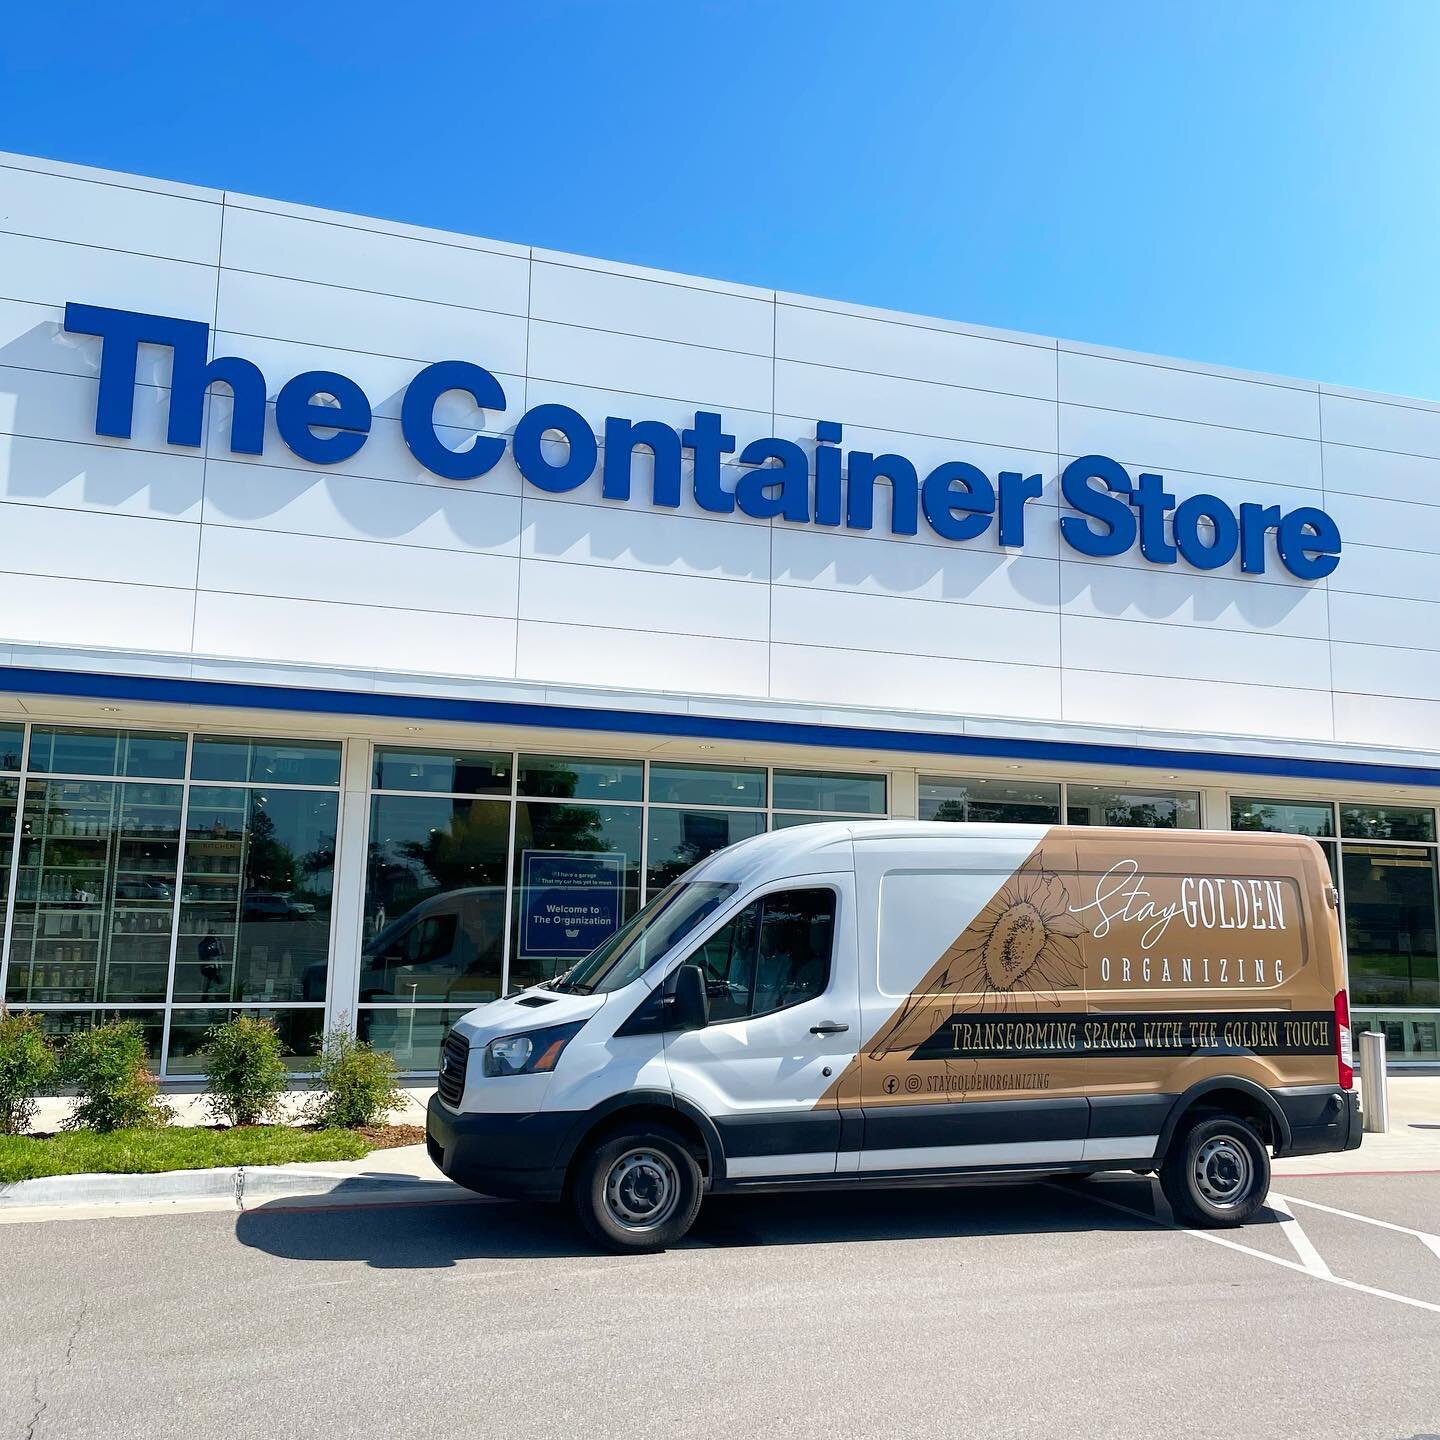 We may be biased, but we think Goldie looks even more beautiful parked in front of our favorite place on earth! 😍

#tulsaorganizer #tulsaorganizers #tulsaorganizing #thecontainerstore #oktcs #homeorganization #professionalorganizer #professionalorga